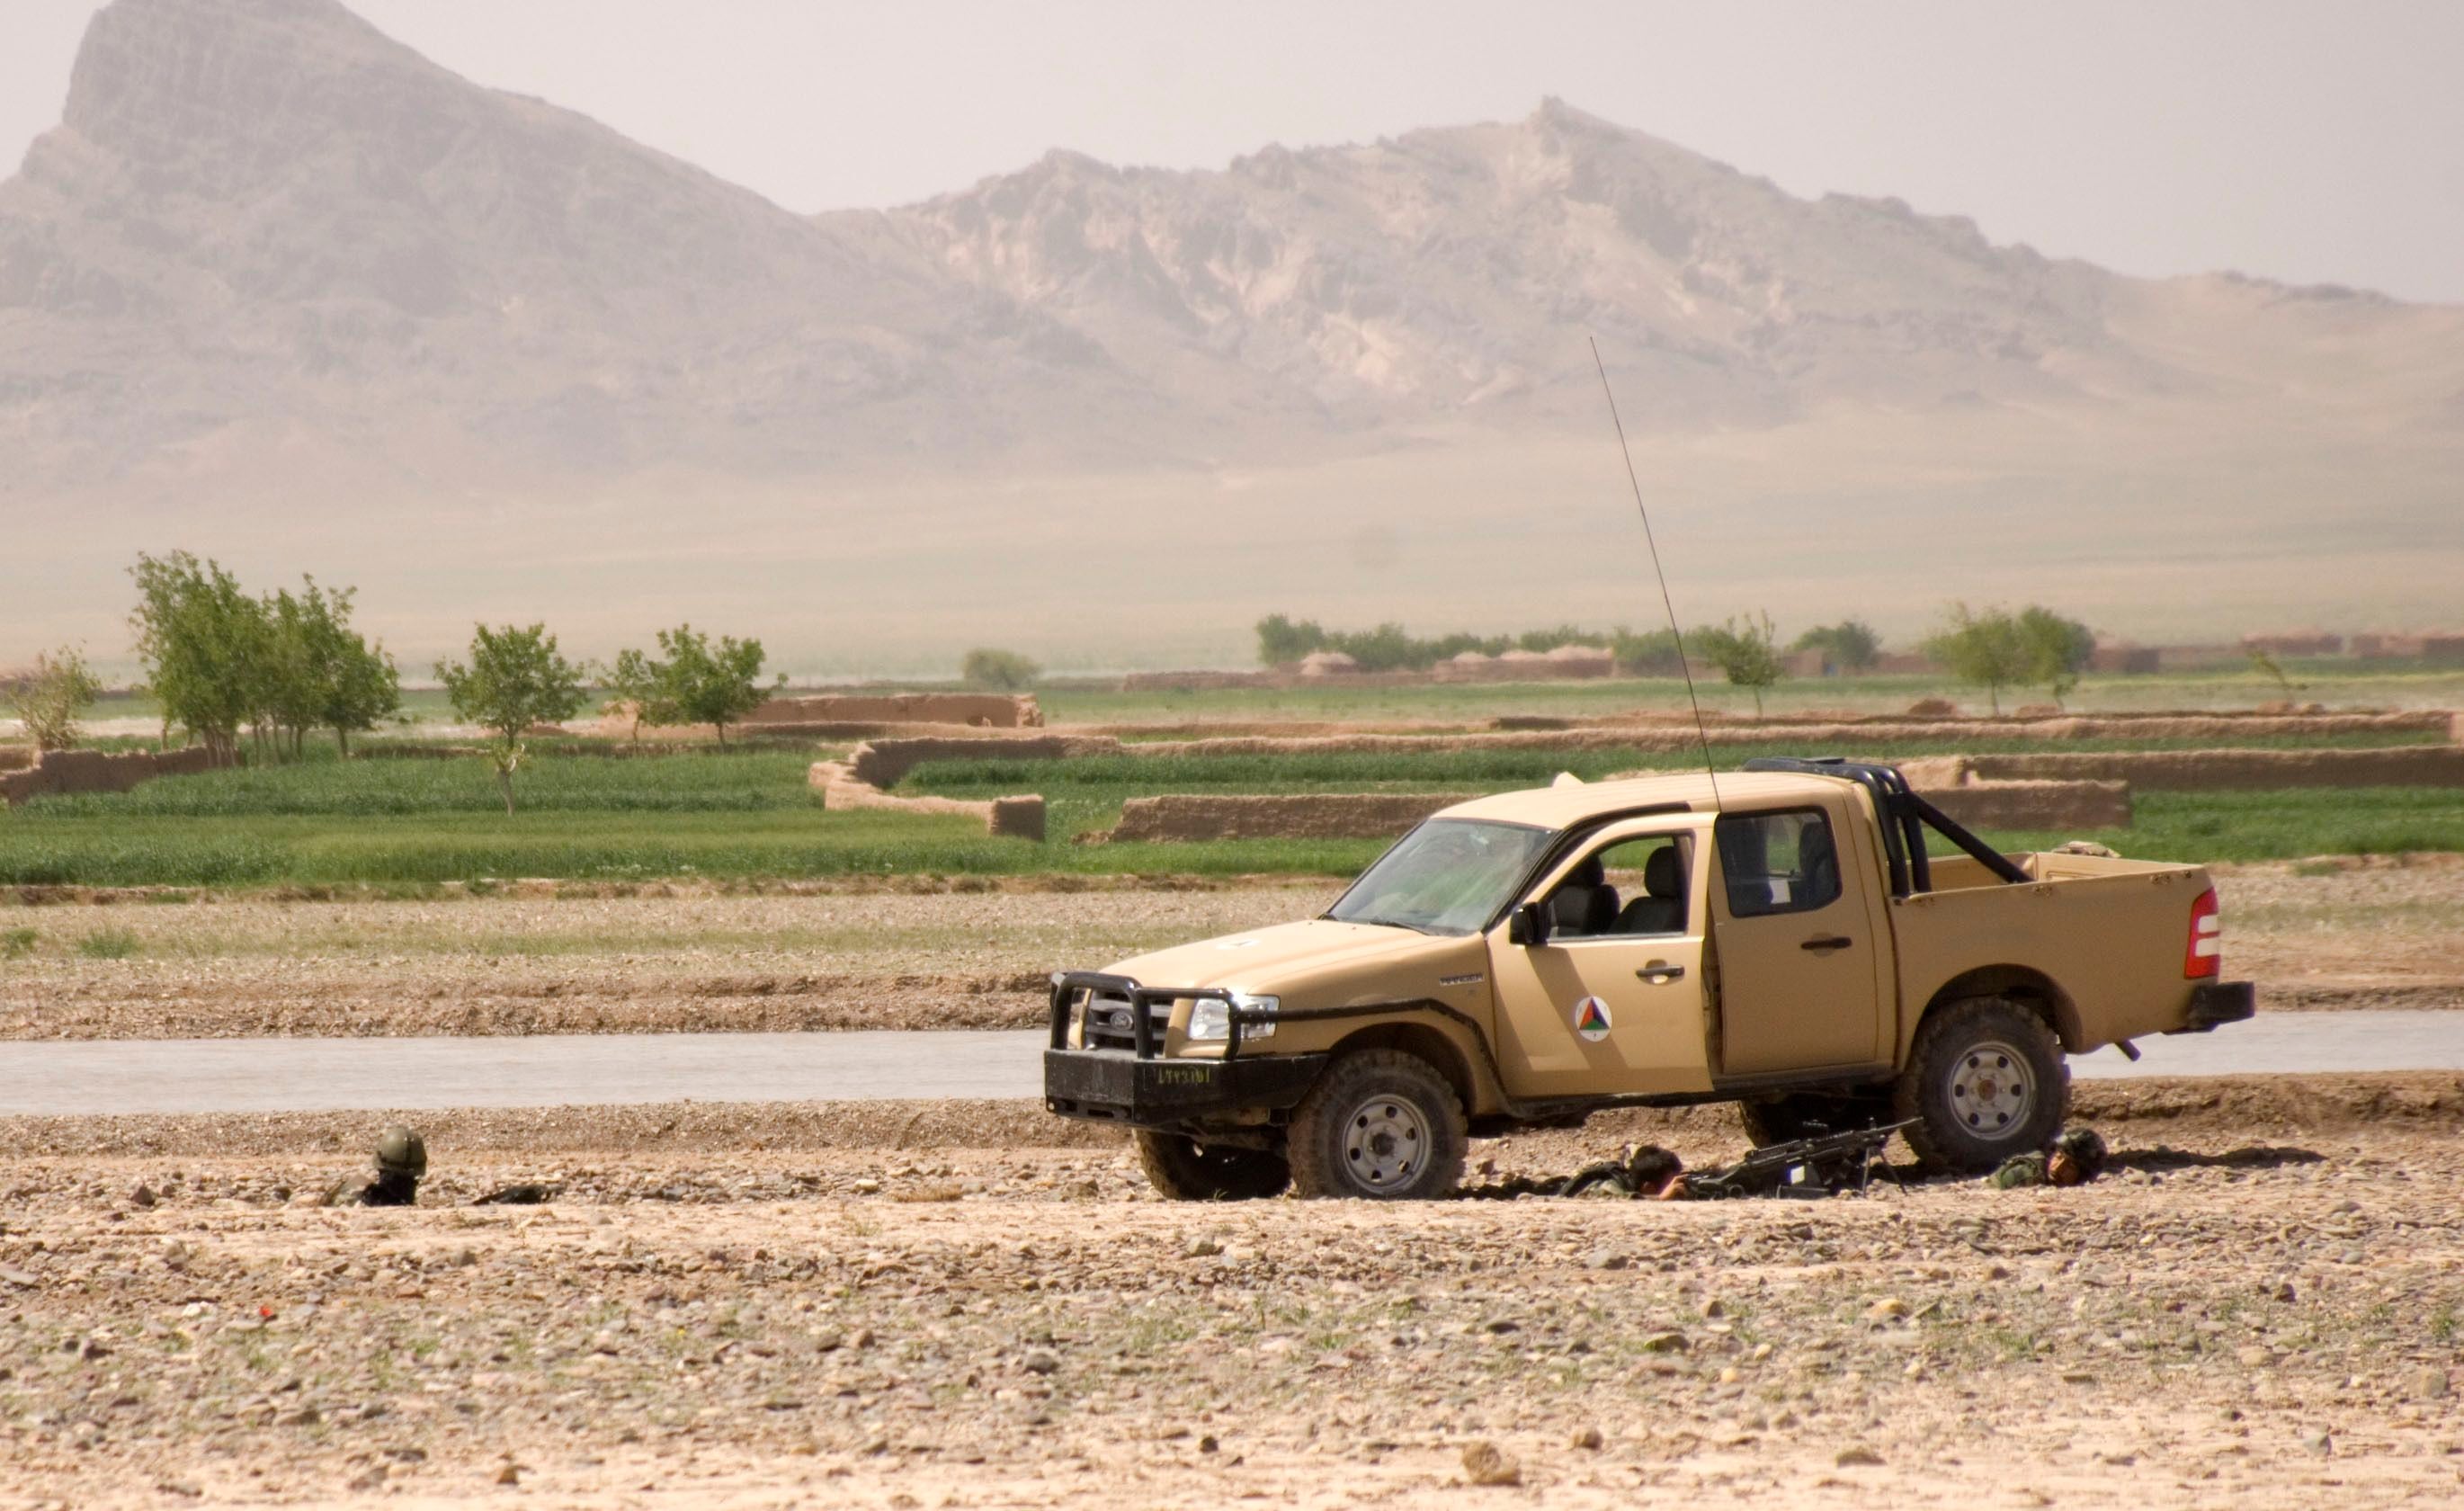 An Afghan commando's truck sits in Herat province after taking gunfire. (Staff Sgt. Marie Schult/Army)